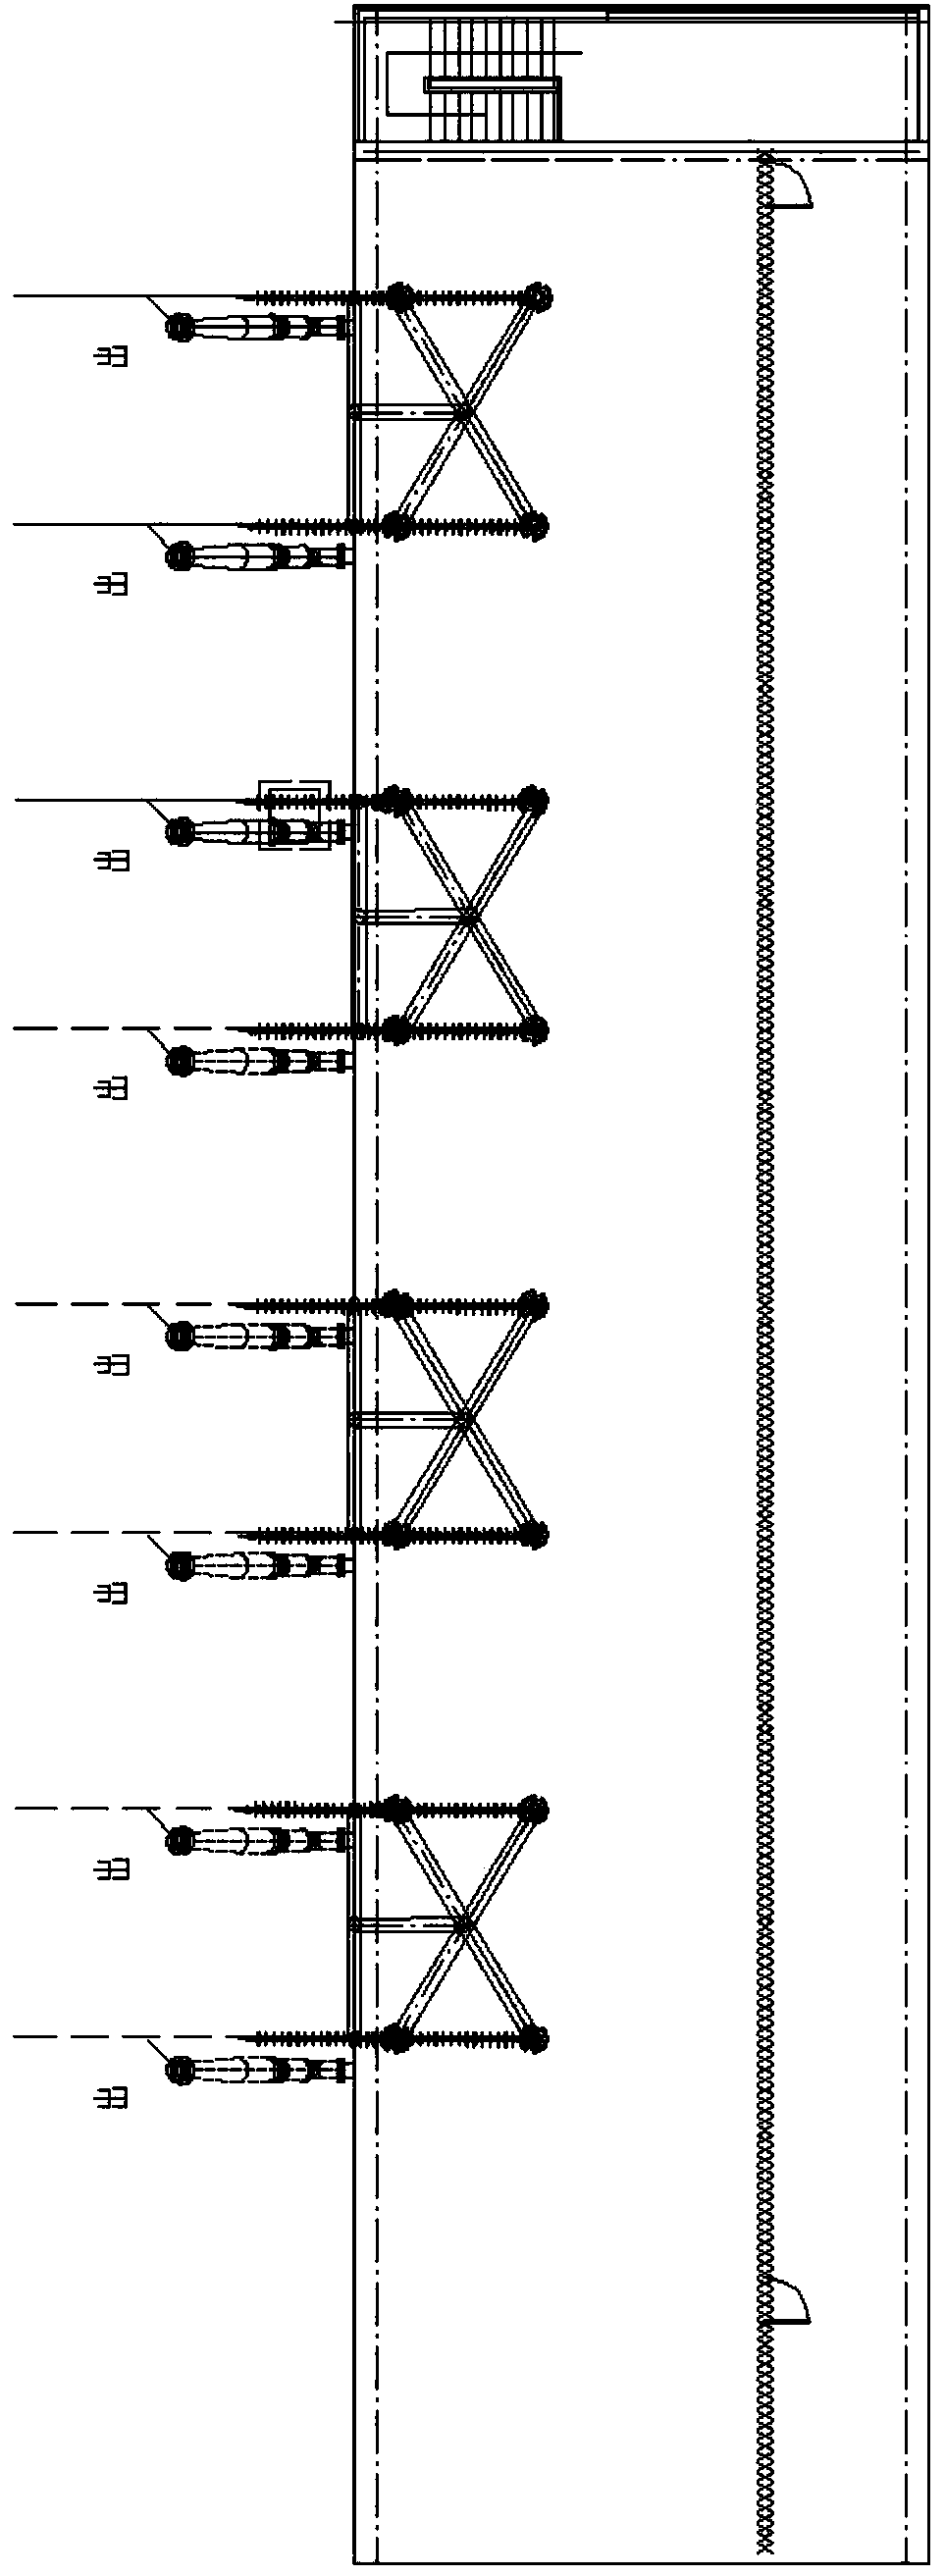 Roof outgoing line structure of indoor GIS equipment